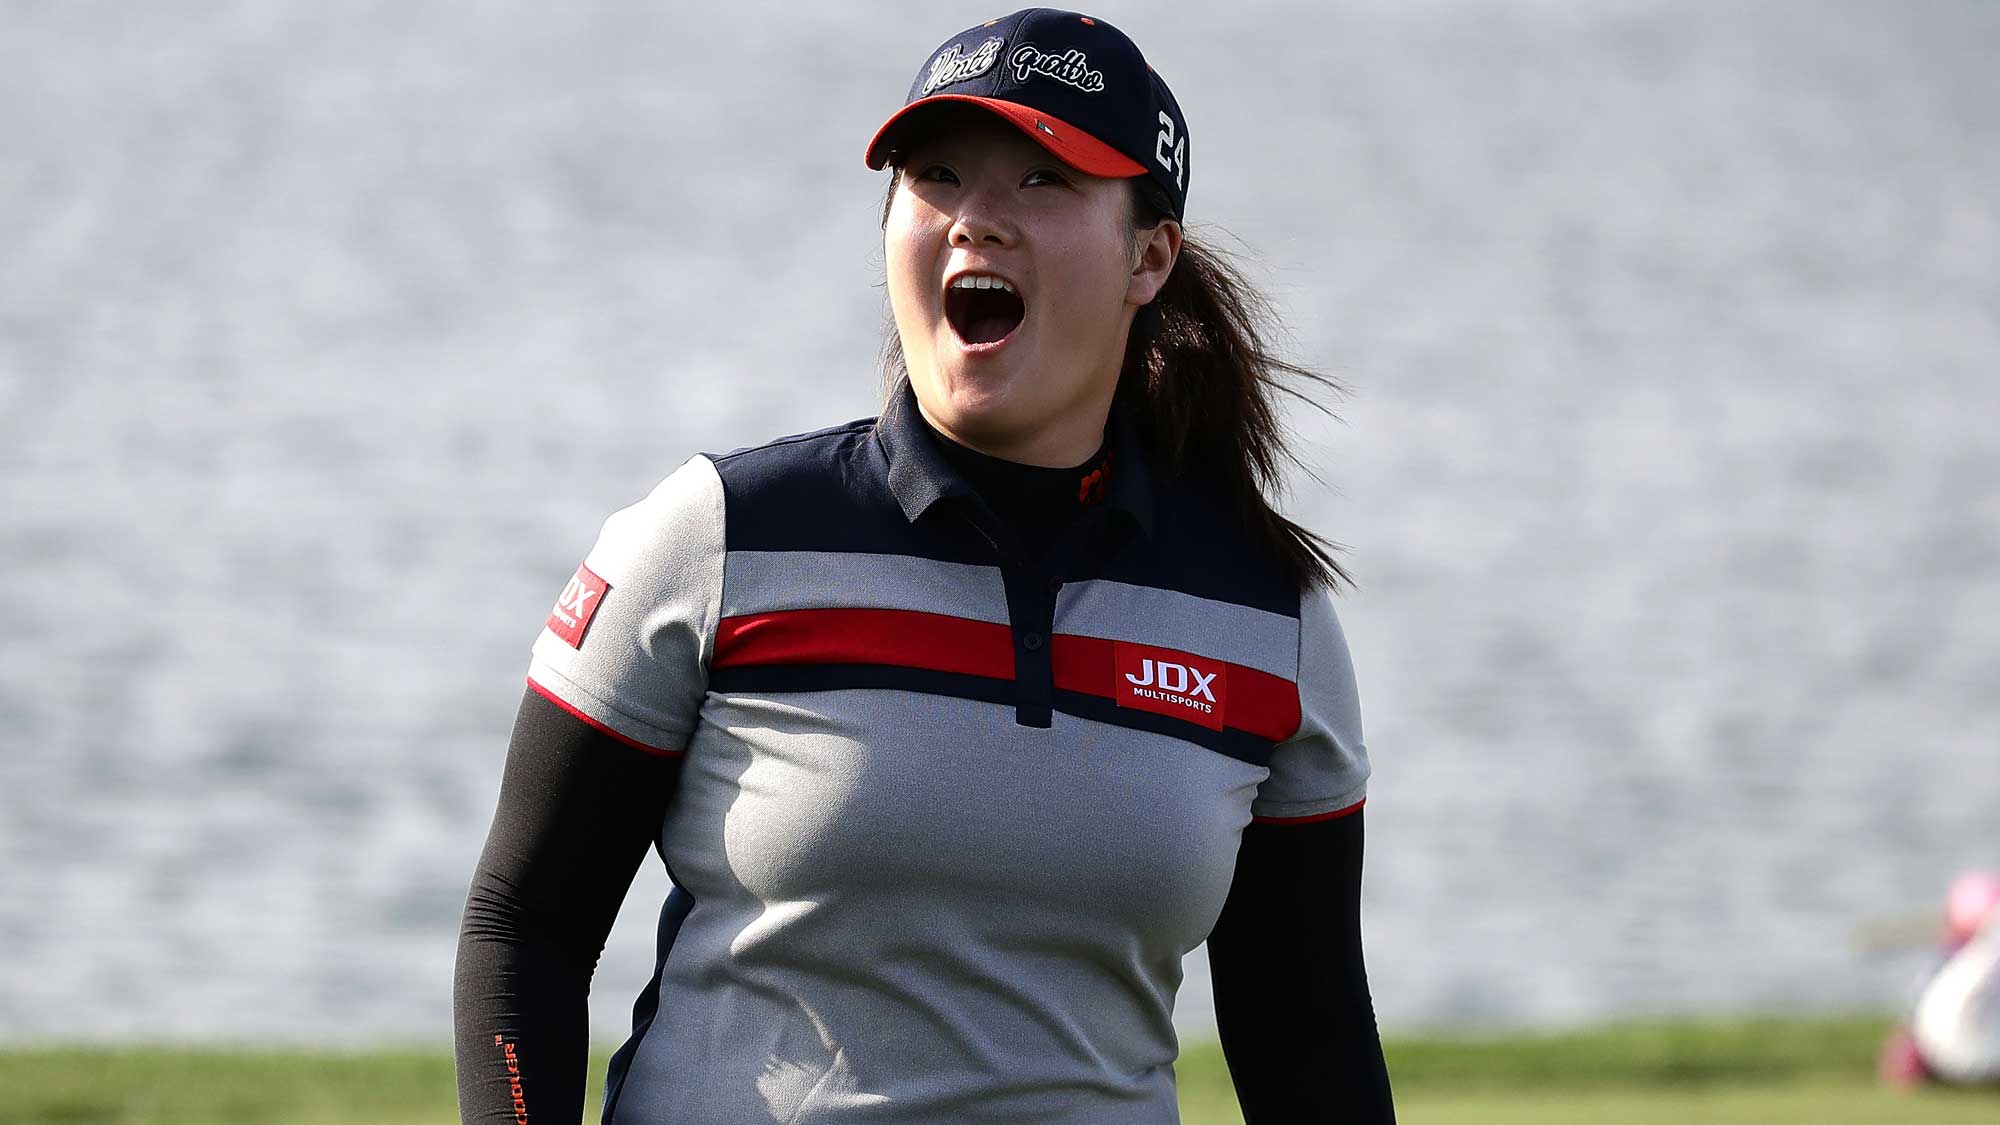 Angel Yin of United States reacts on the 18th green during the second round of the LPGA KEB Hana Bank Championship